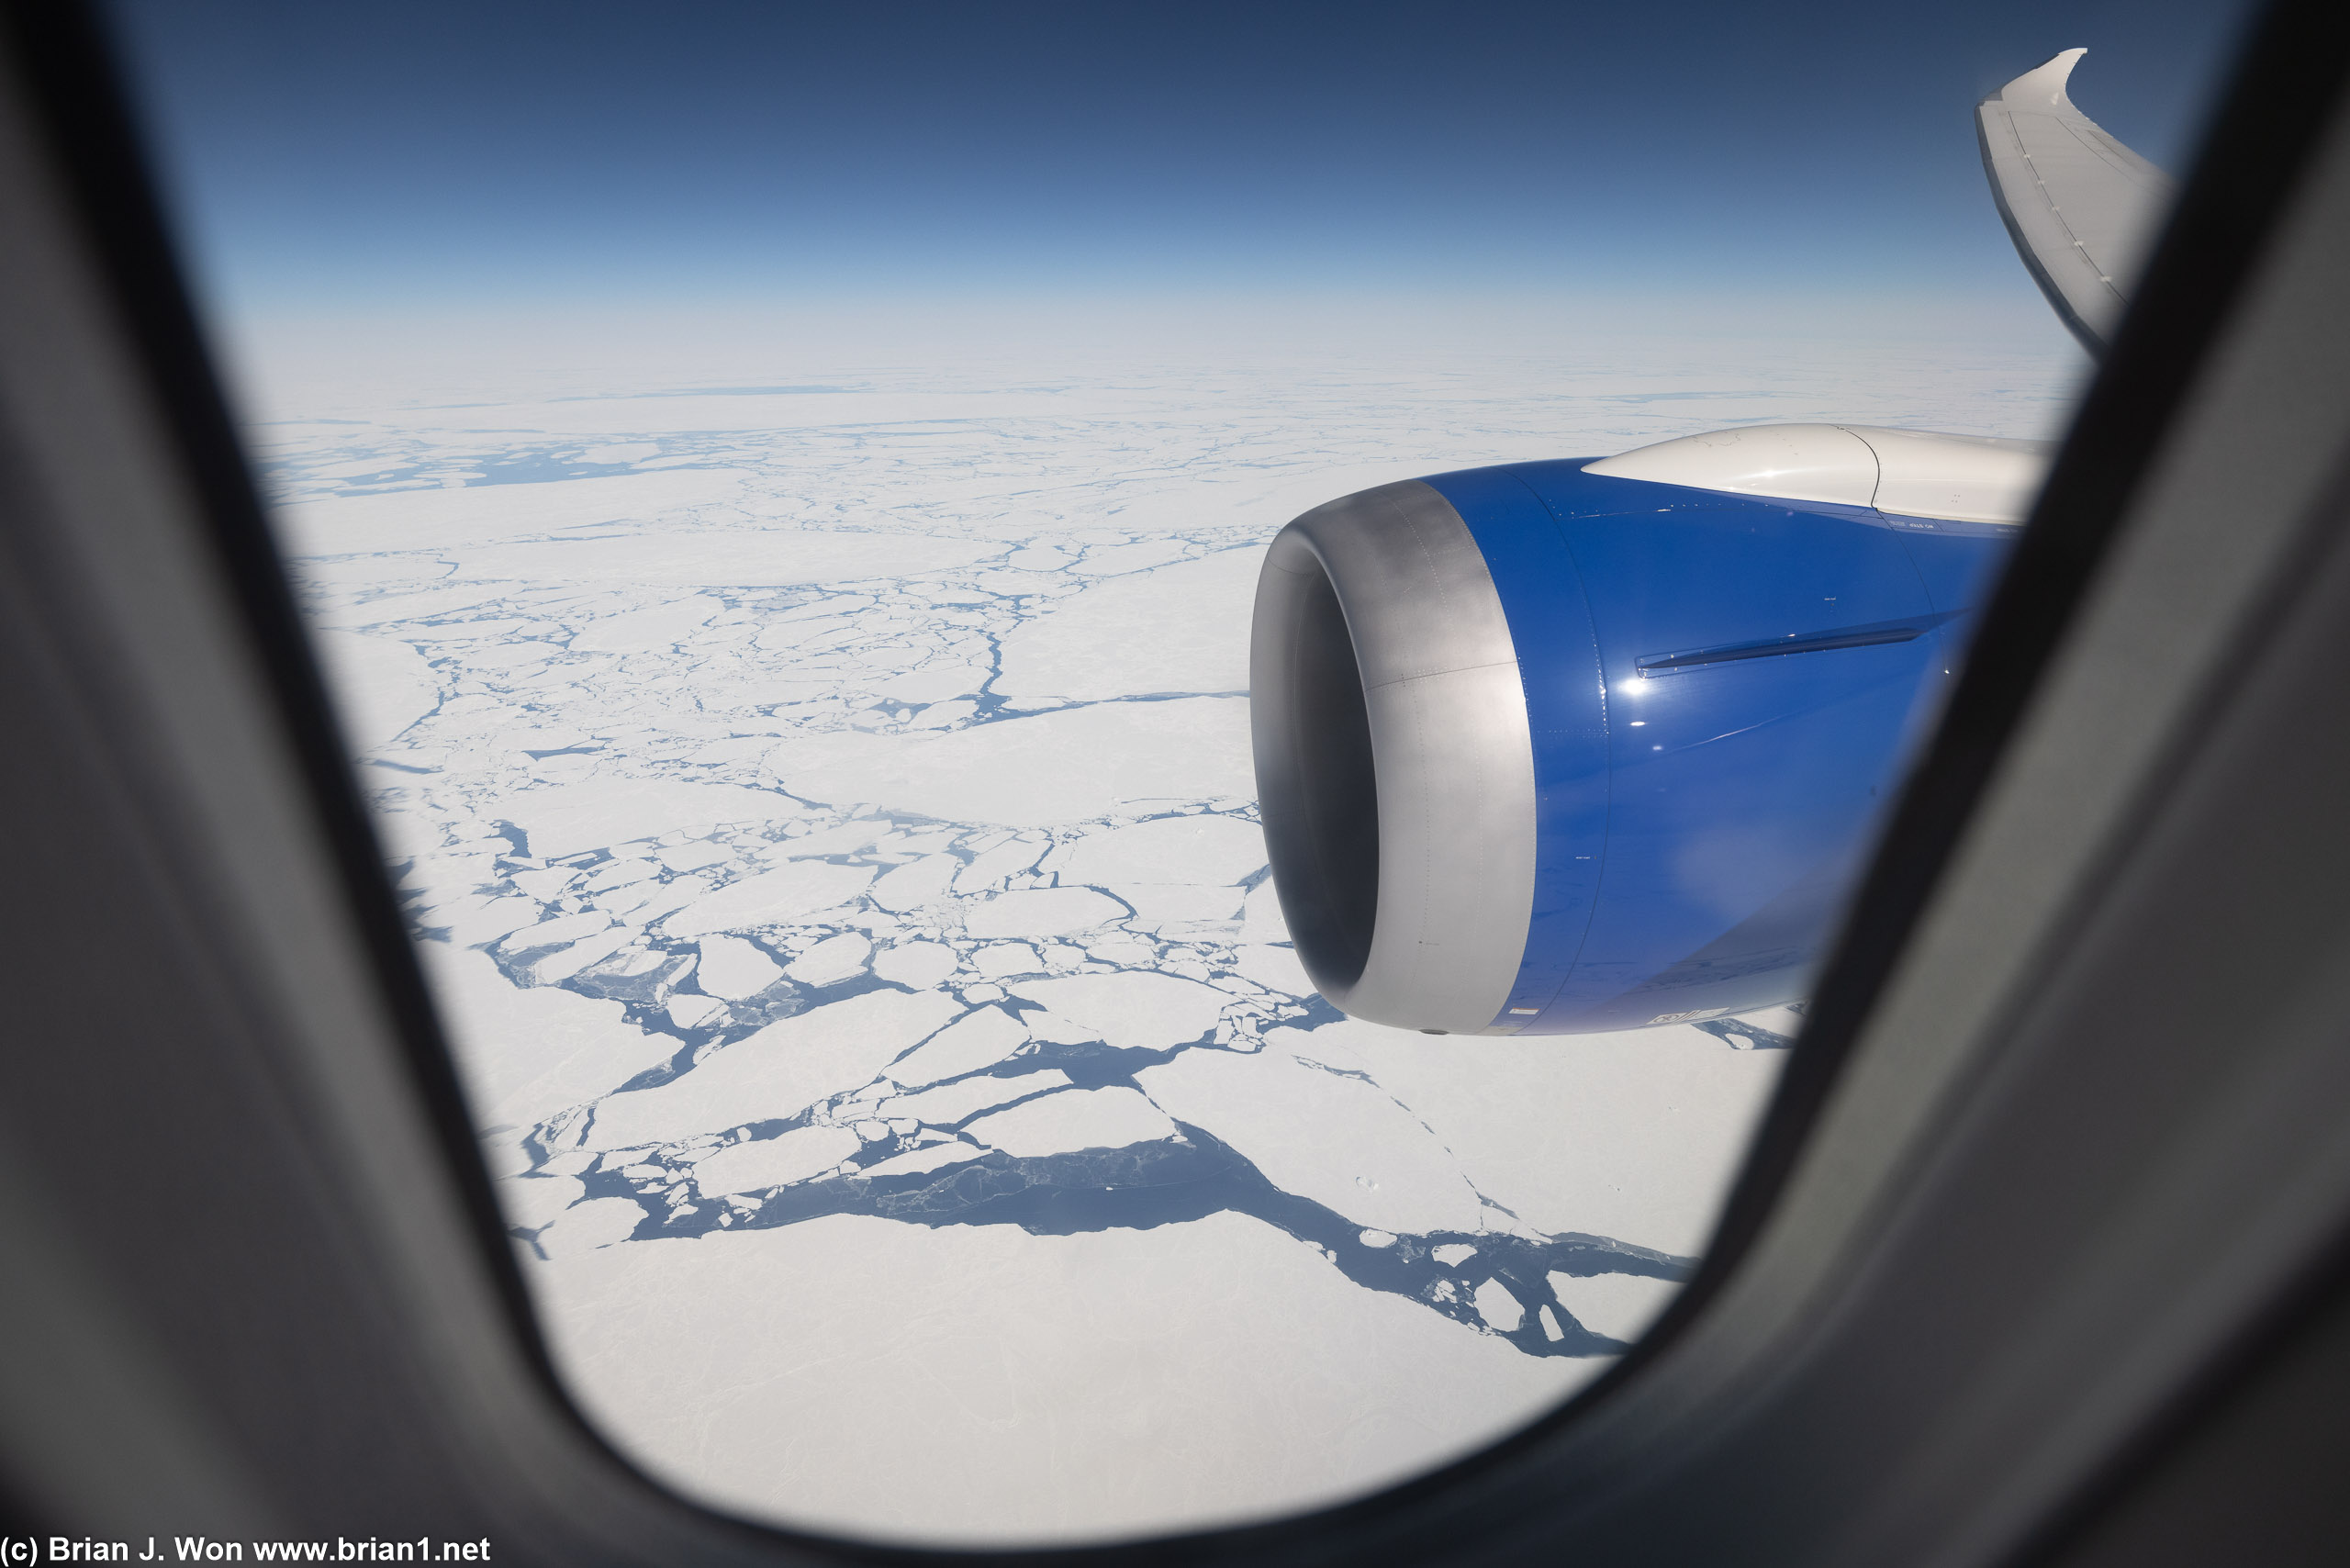 Over western Greenland, further west/northwest of Aasiaat.